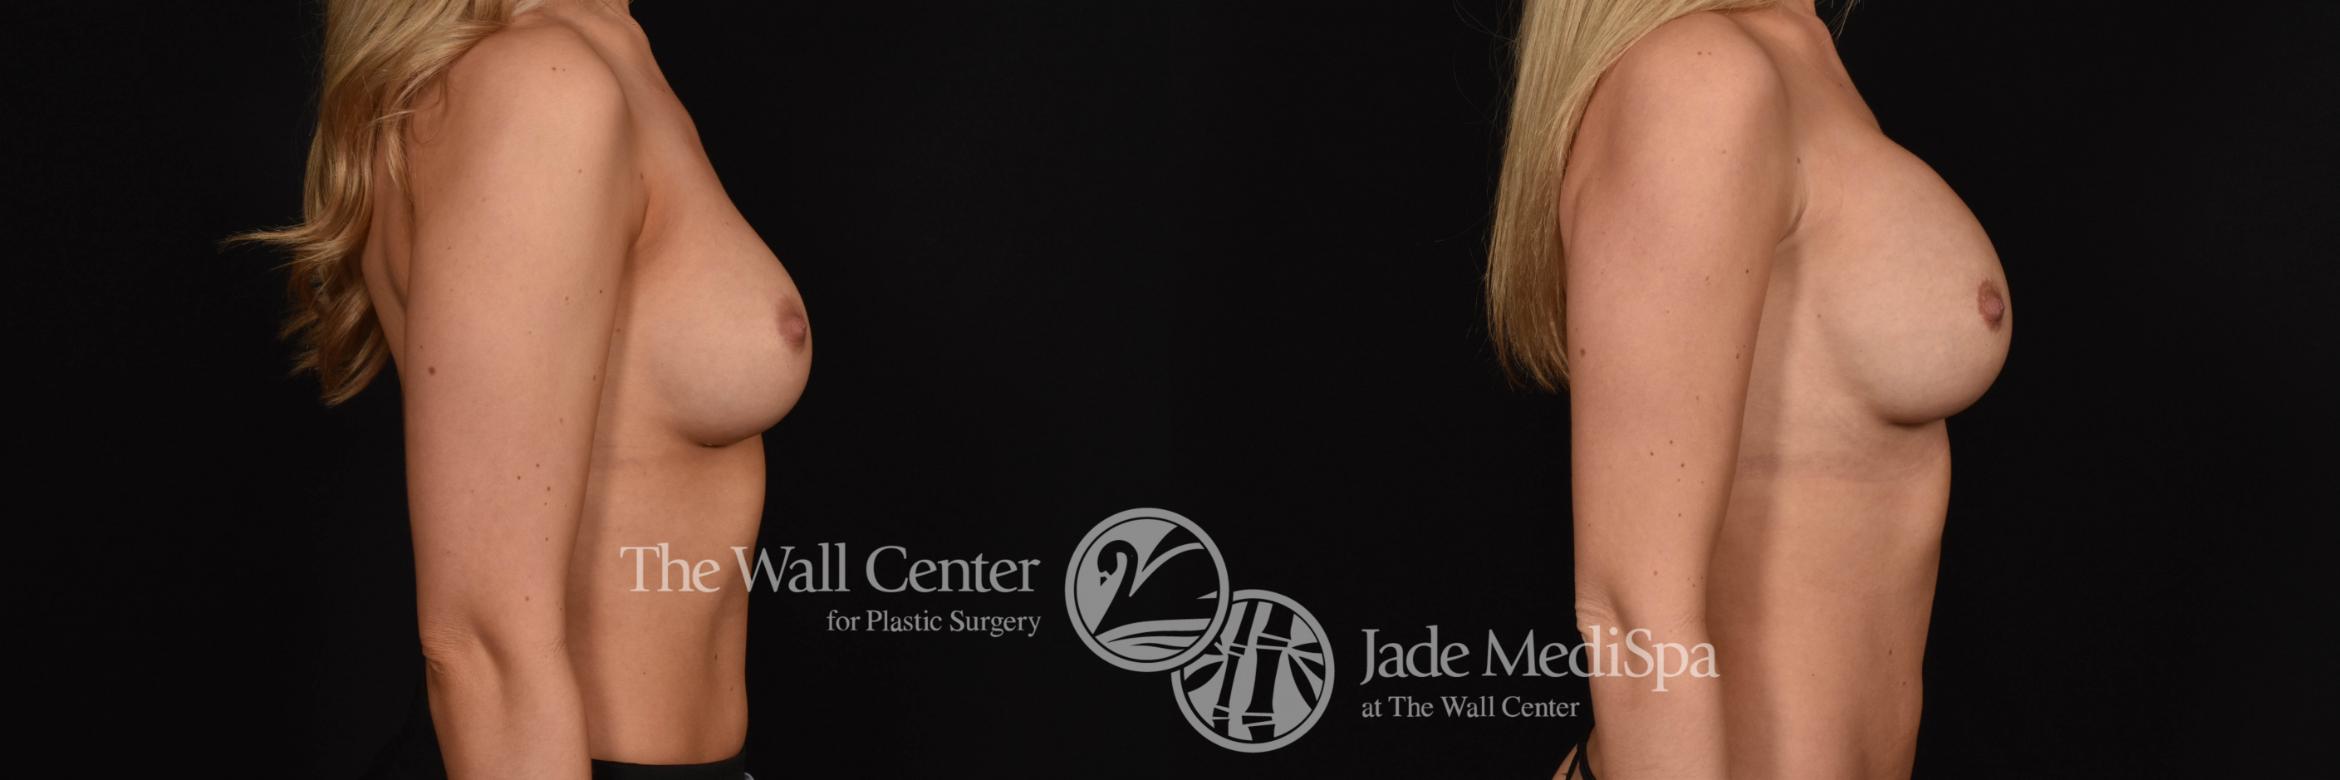 Breast Implant Exchange Right Side Photo, Shreveport, Louisiana, The Wall Center for Plastic Surgery, Case 861